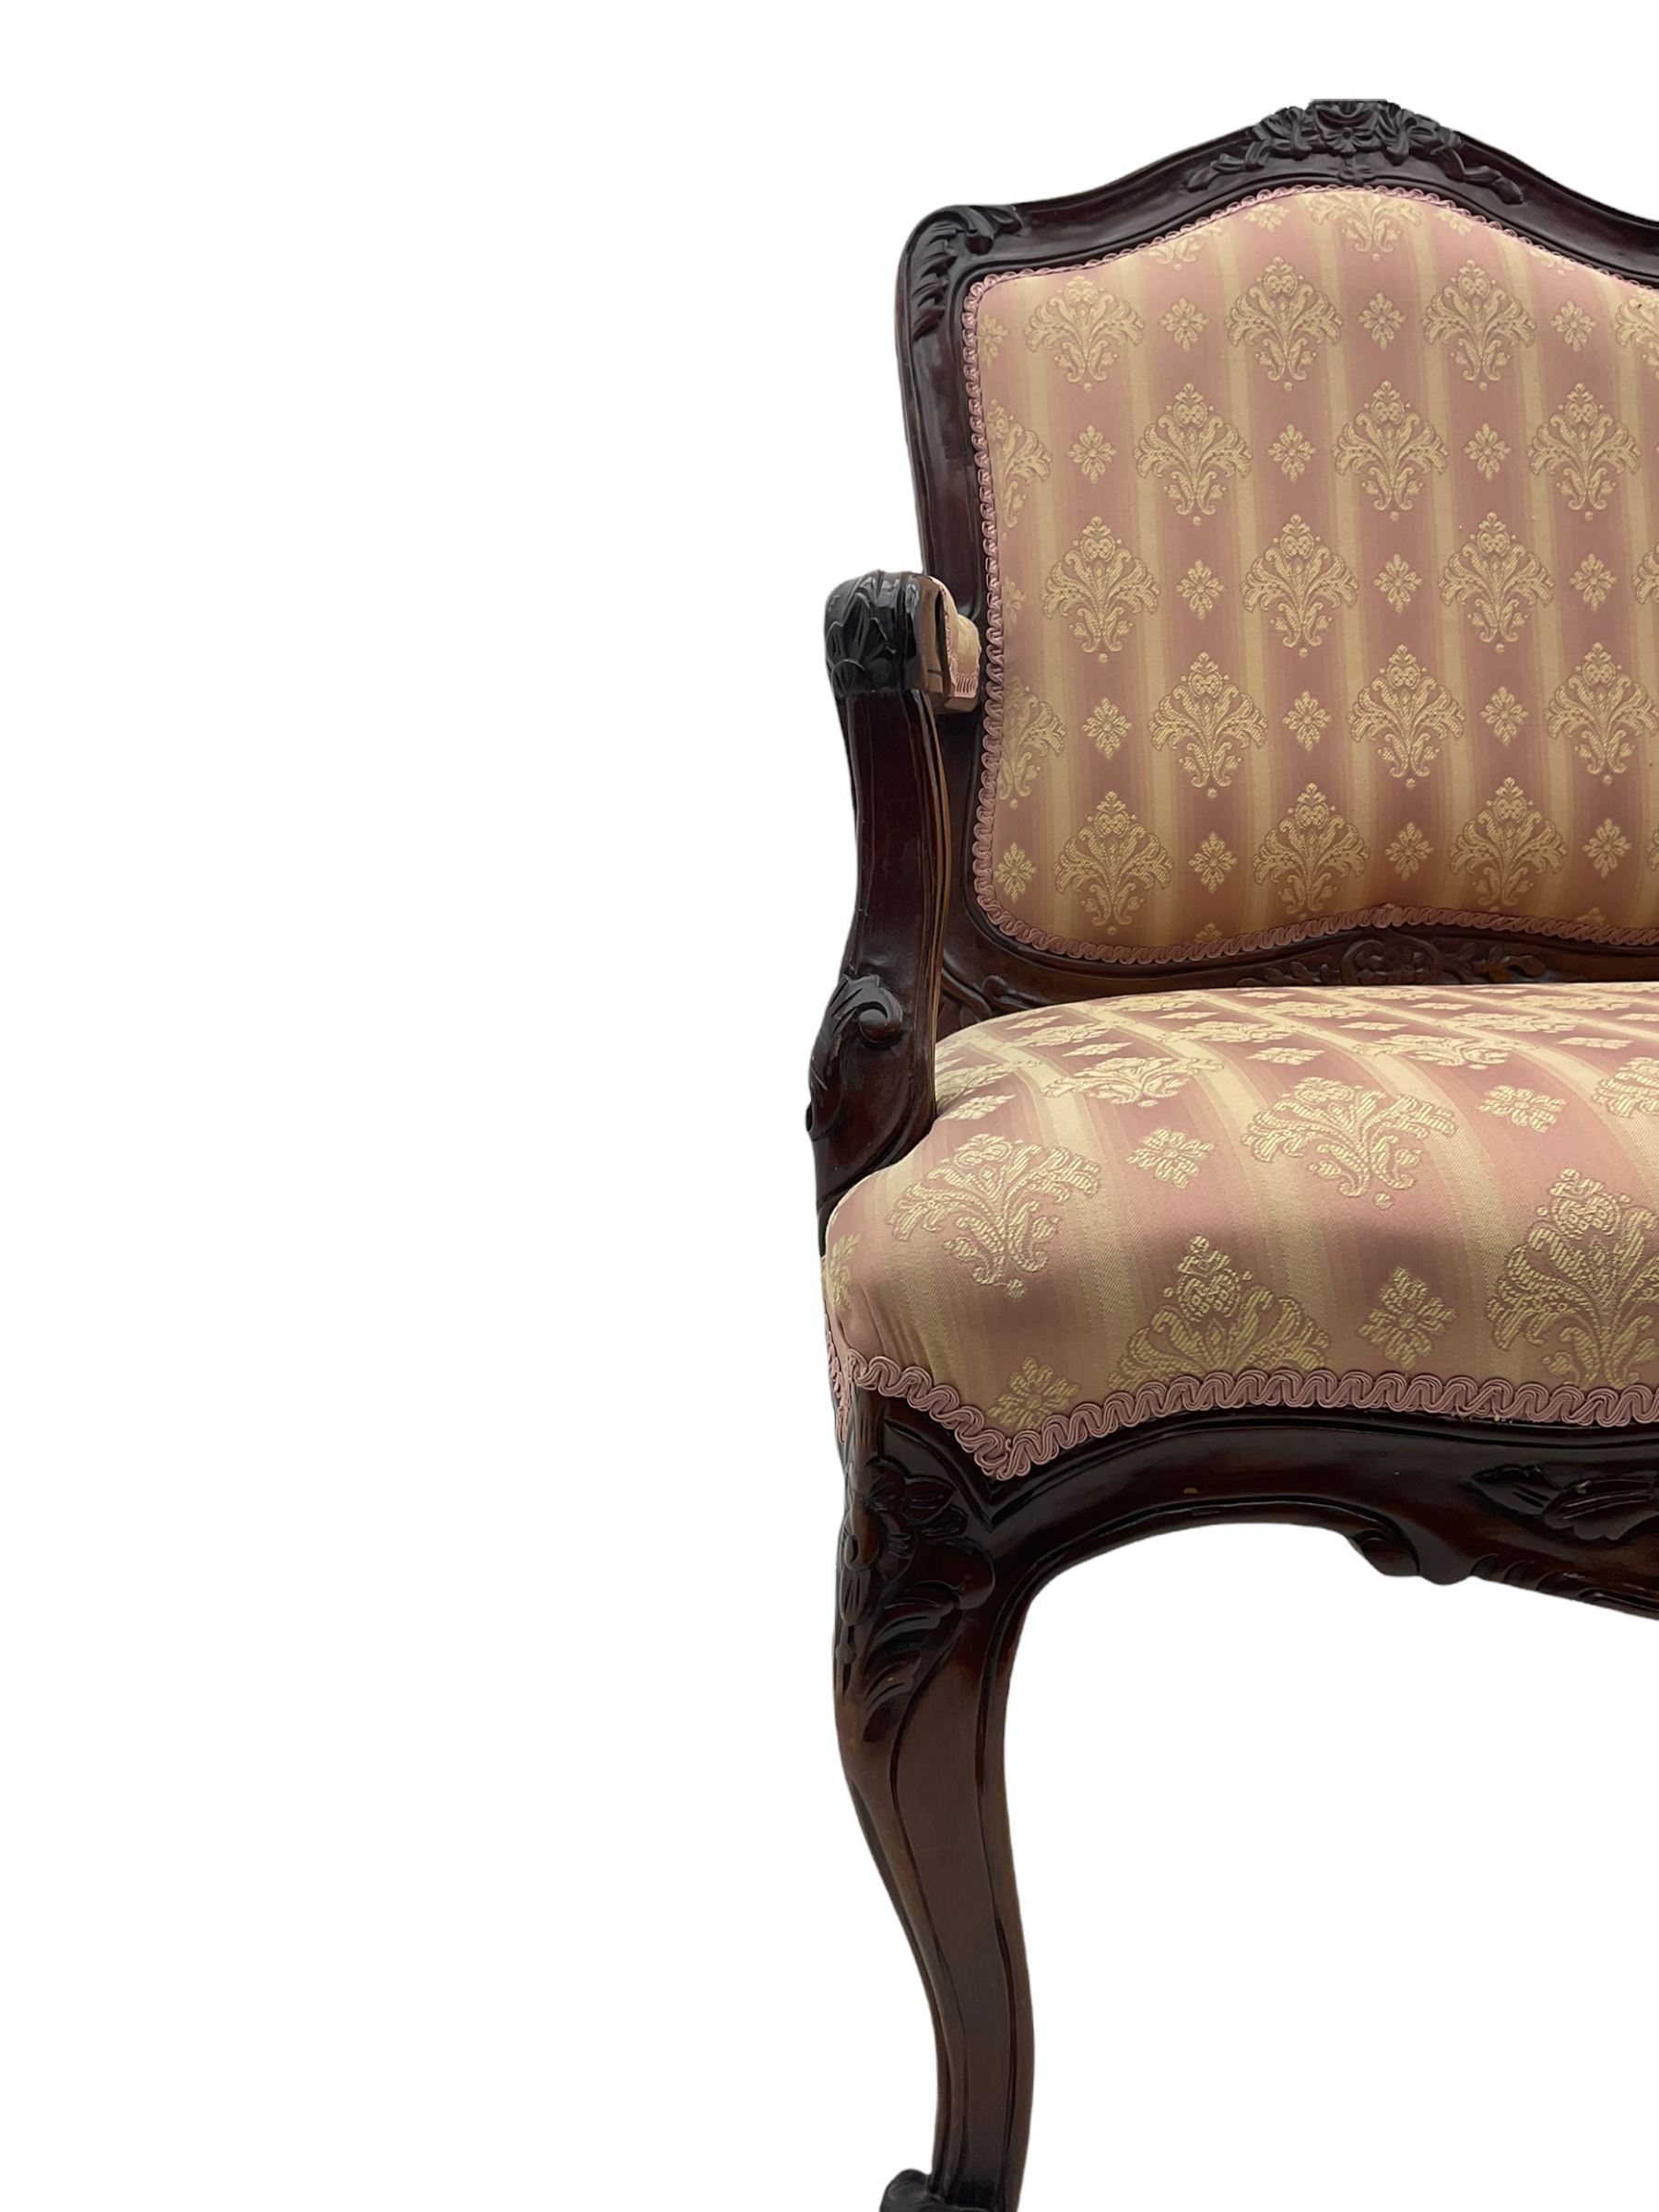 French style walnut framed upholstered armchair - Image 6 of 10